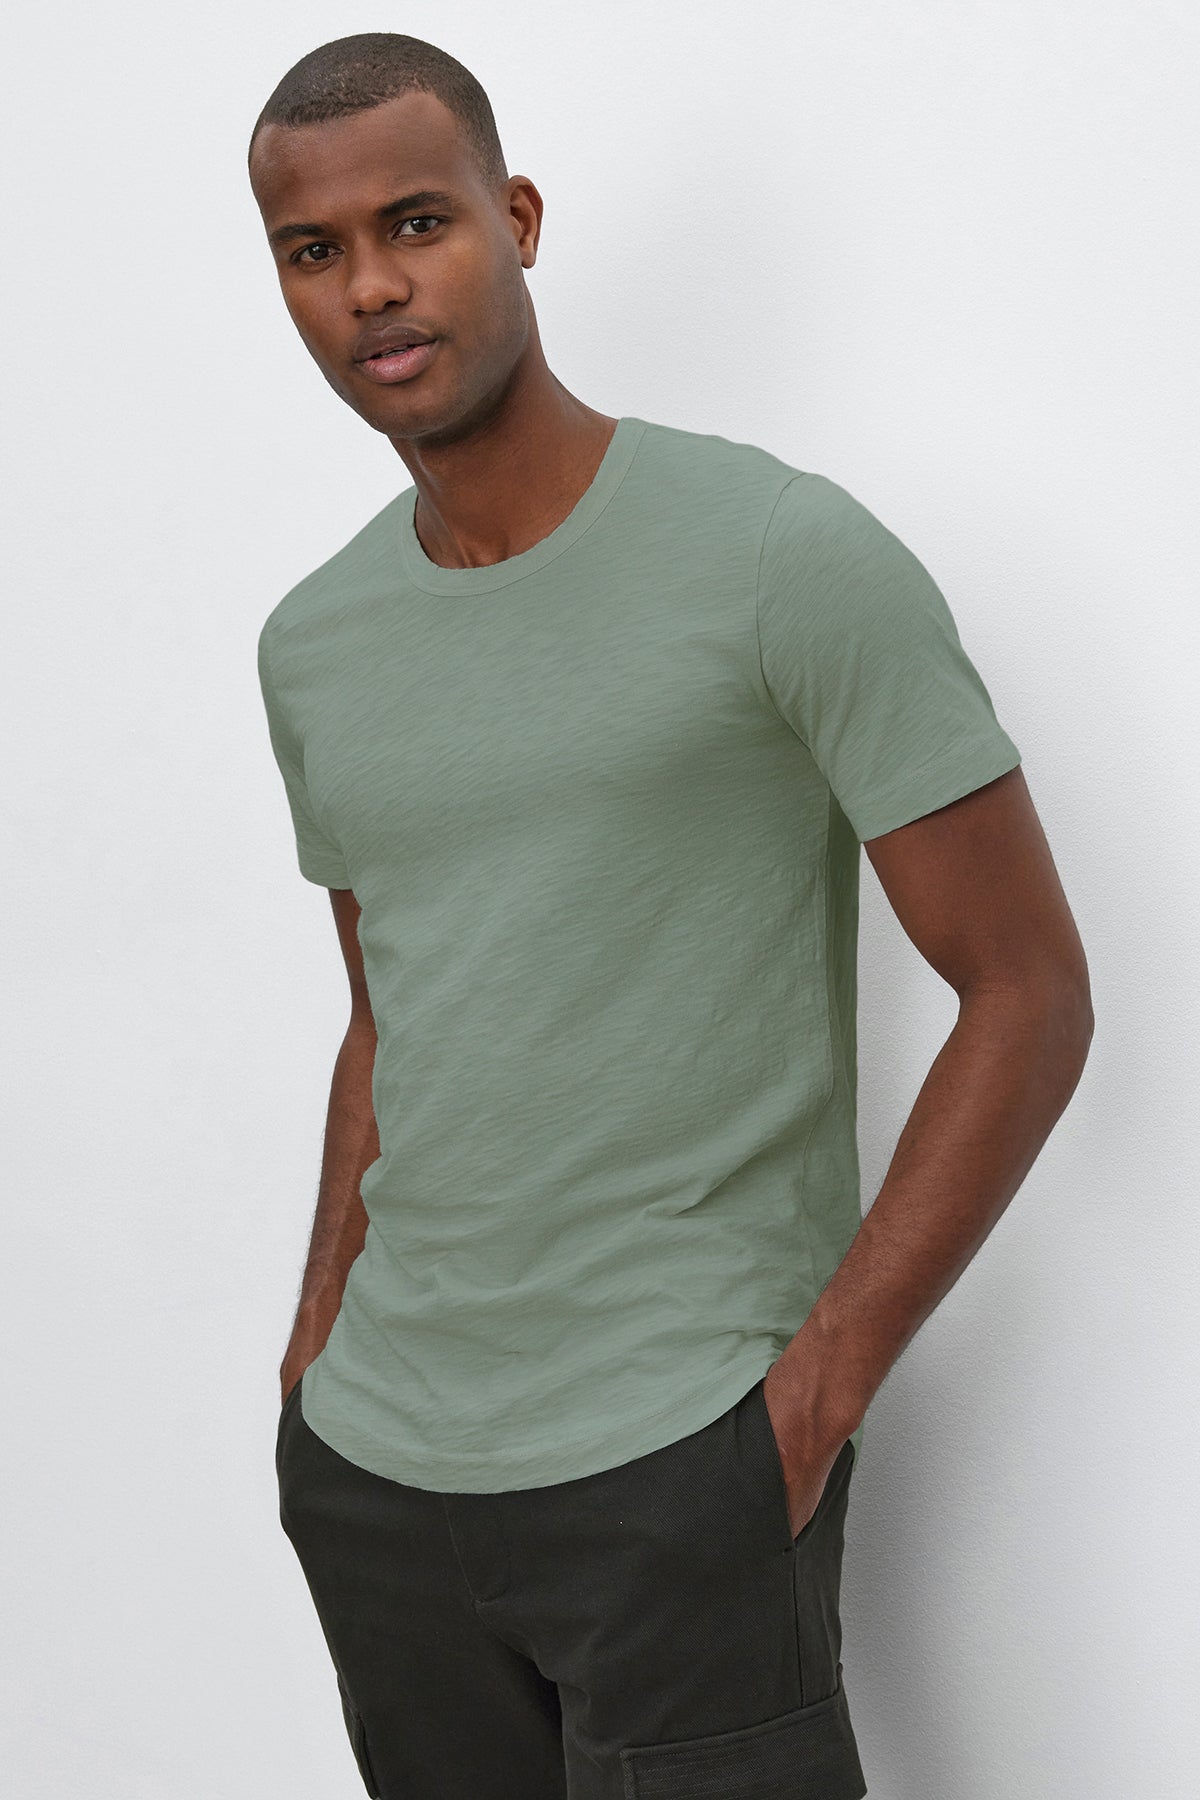 A man wearing a stylish, medium-weight AMARO TEE by Velvet by Graham & Spencer in light green and dark pants stands against a white background, with hands in his pockets.-36909384761537